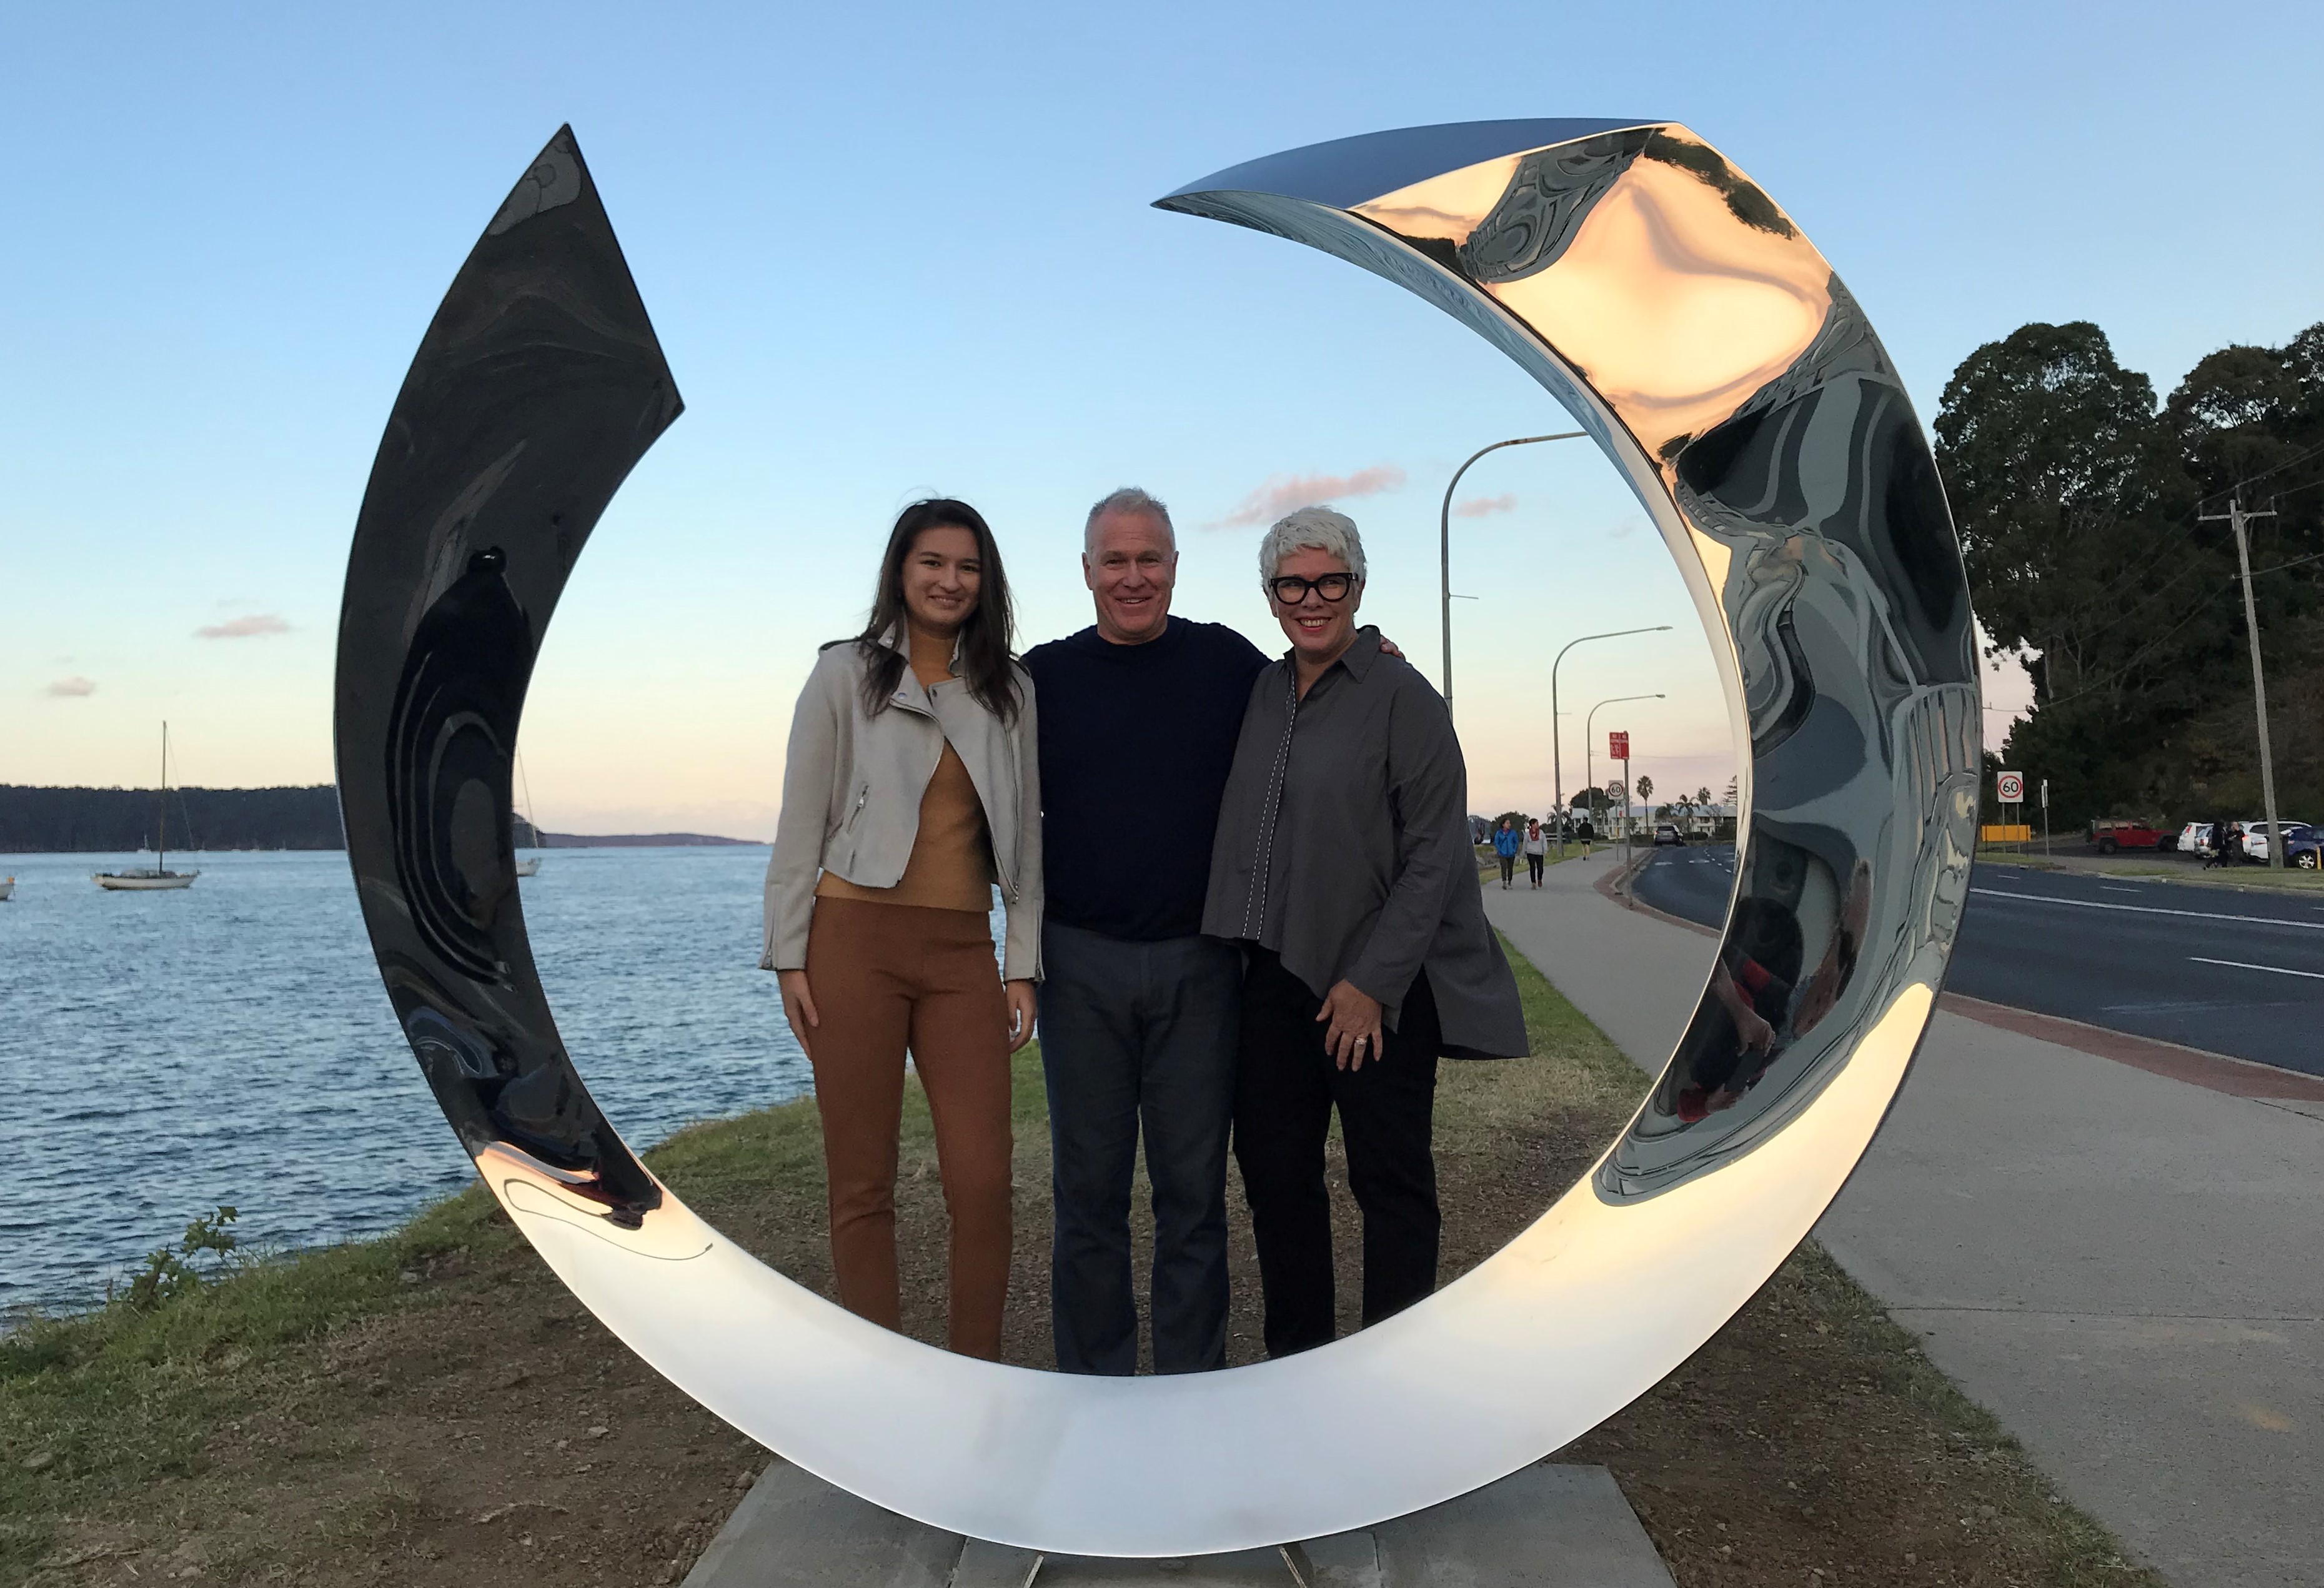 Batemans Bay sculpture collection grows admist the beauty of the Clyde